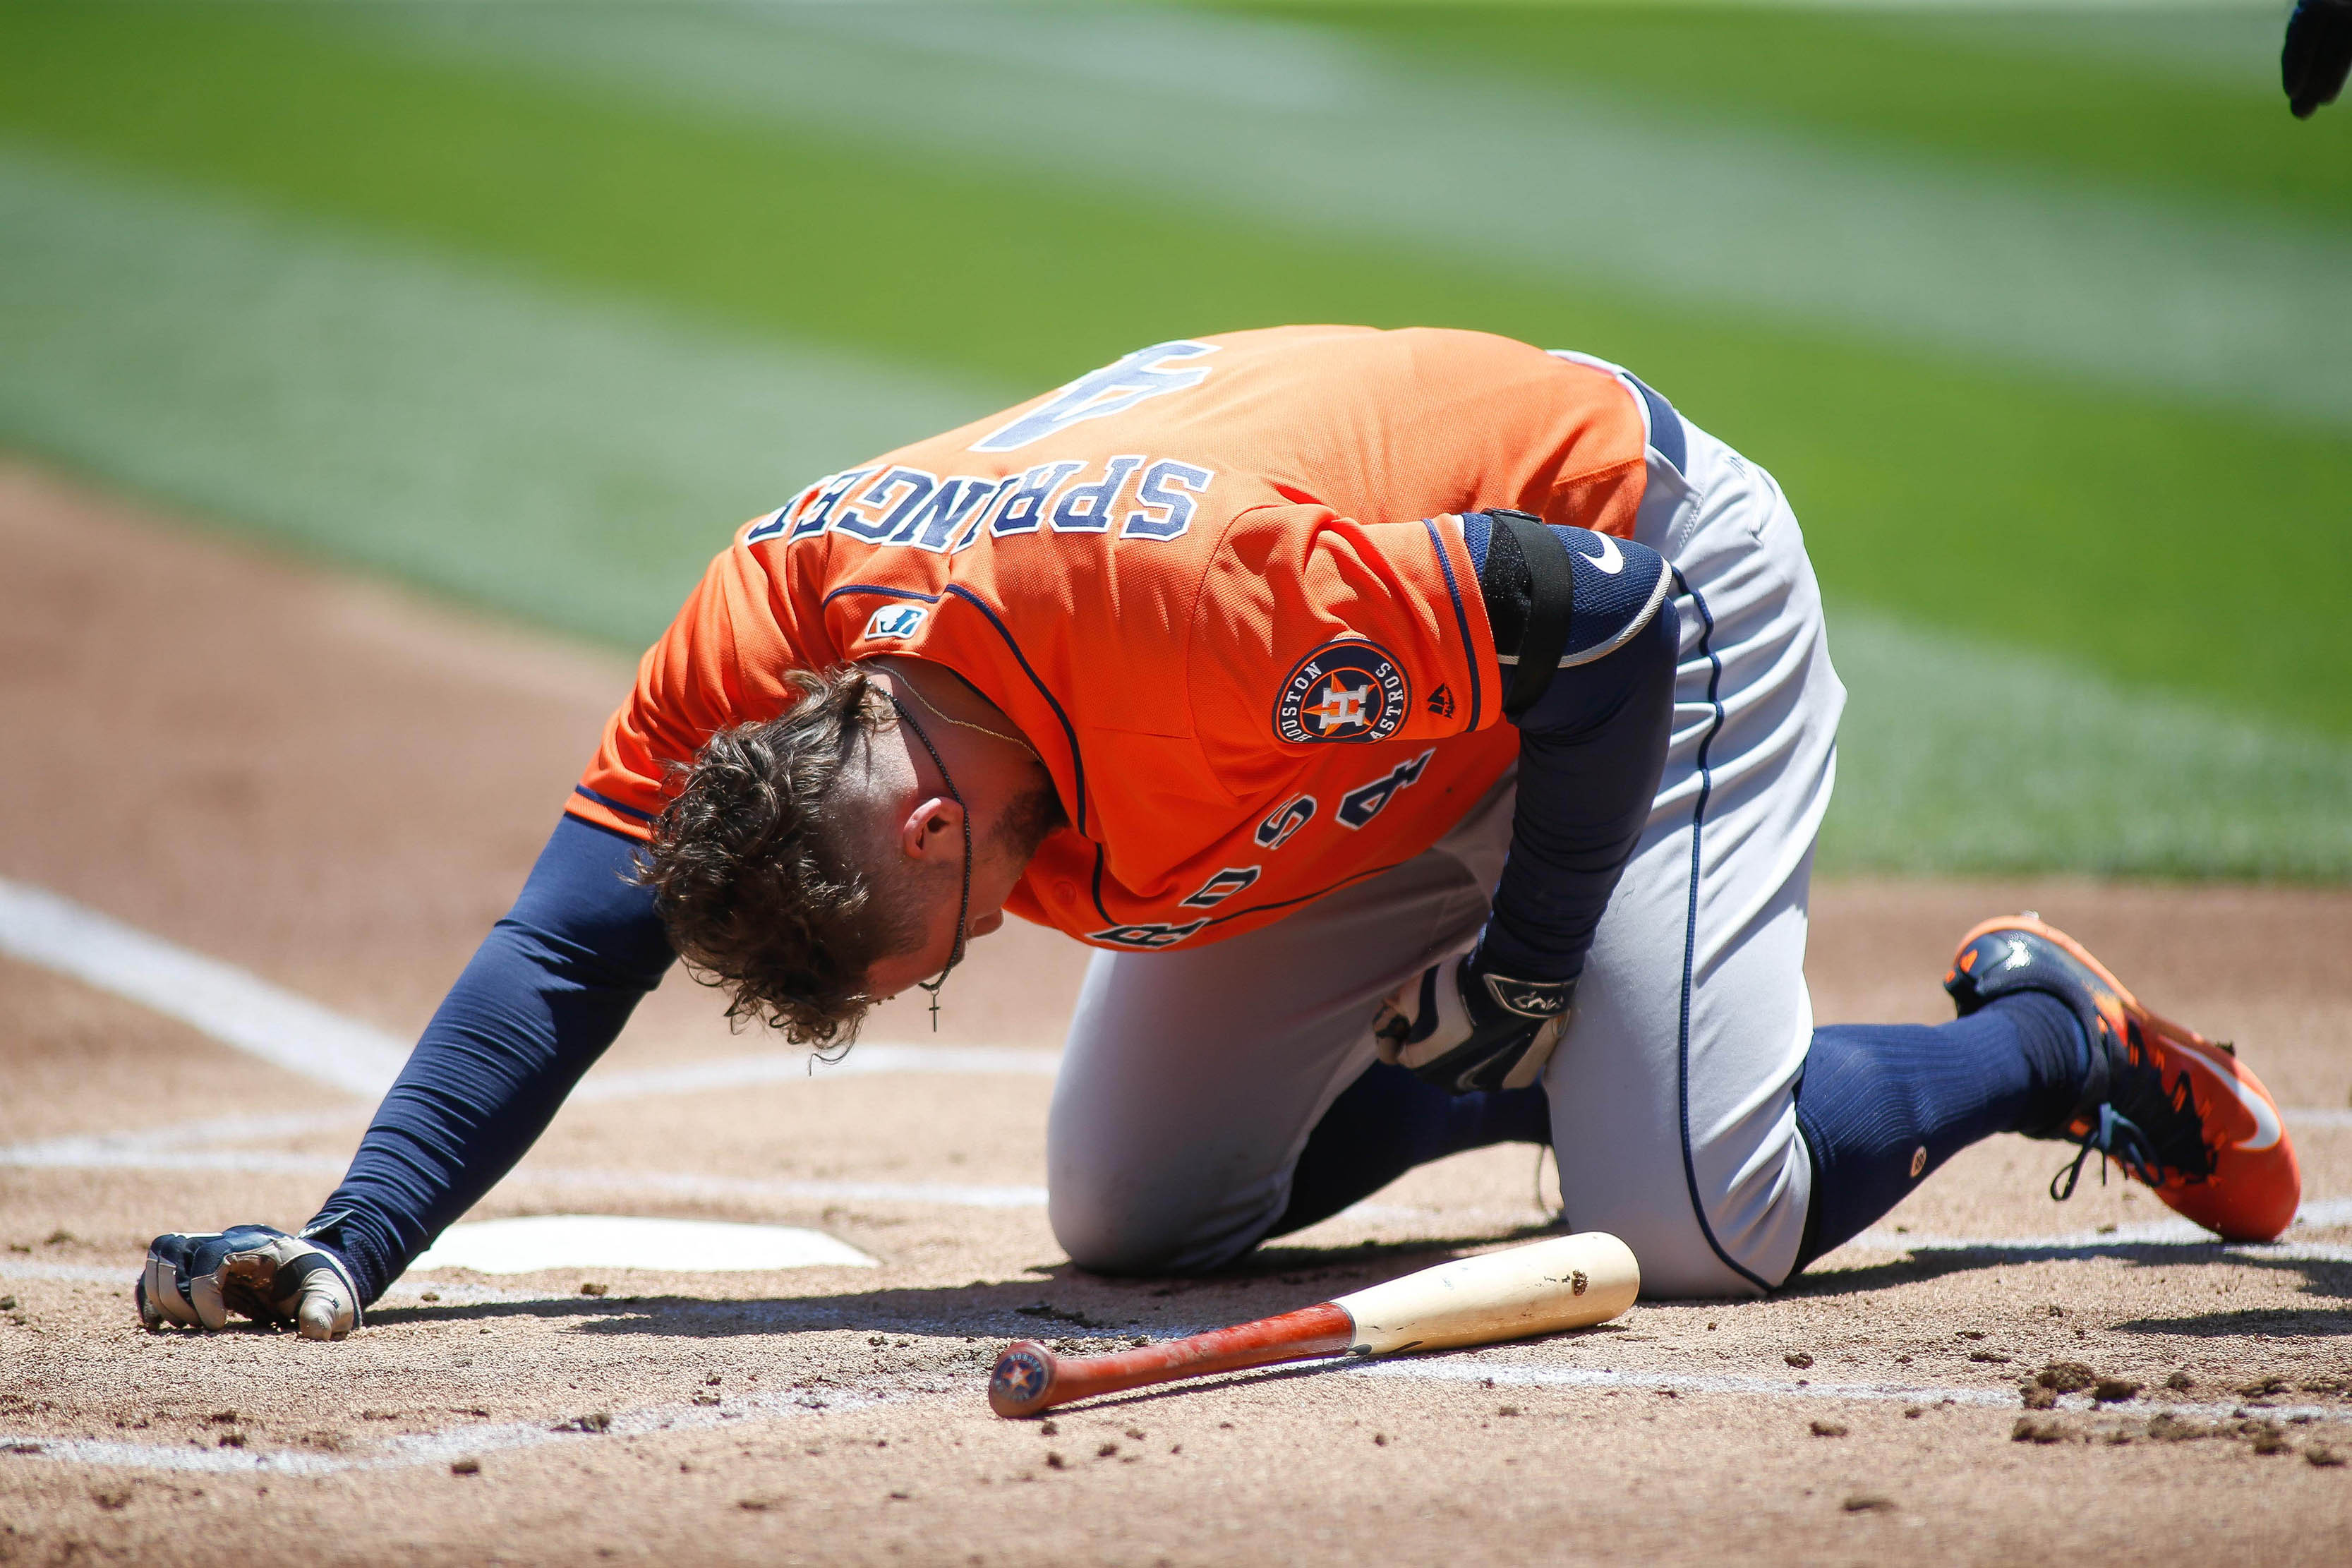 Houston Astros Springer injured after hit by pitch